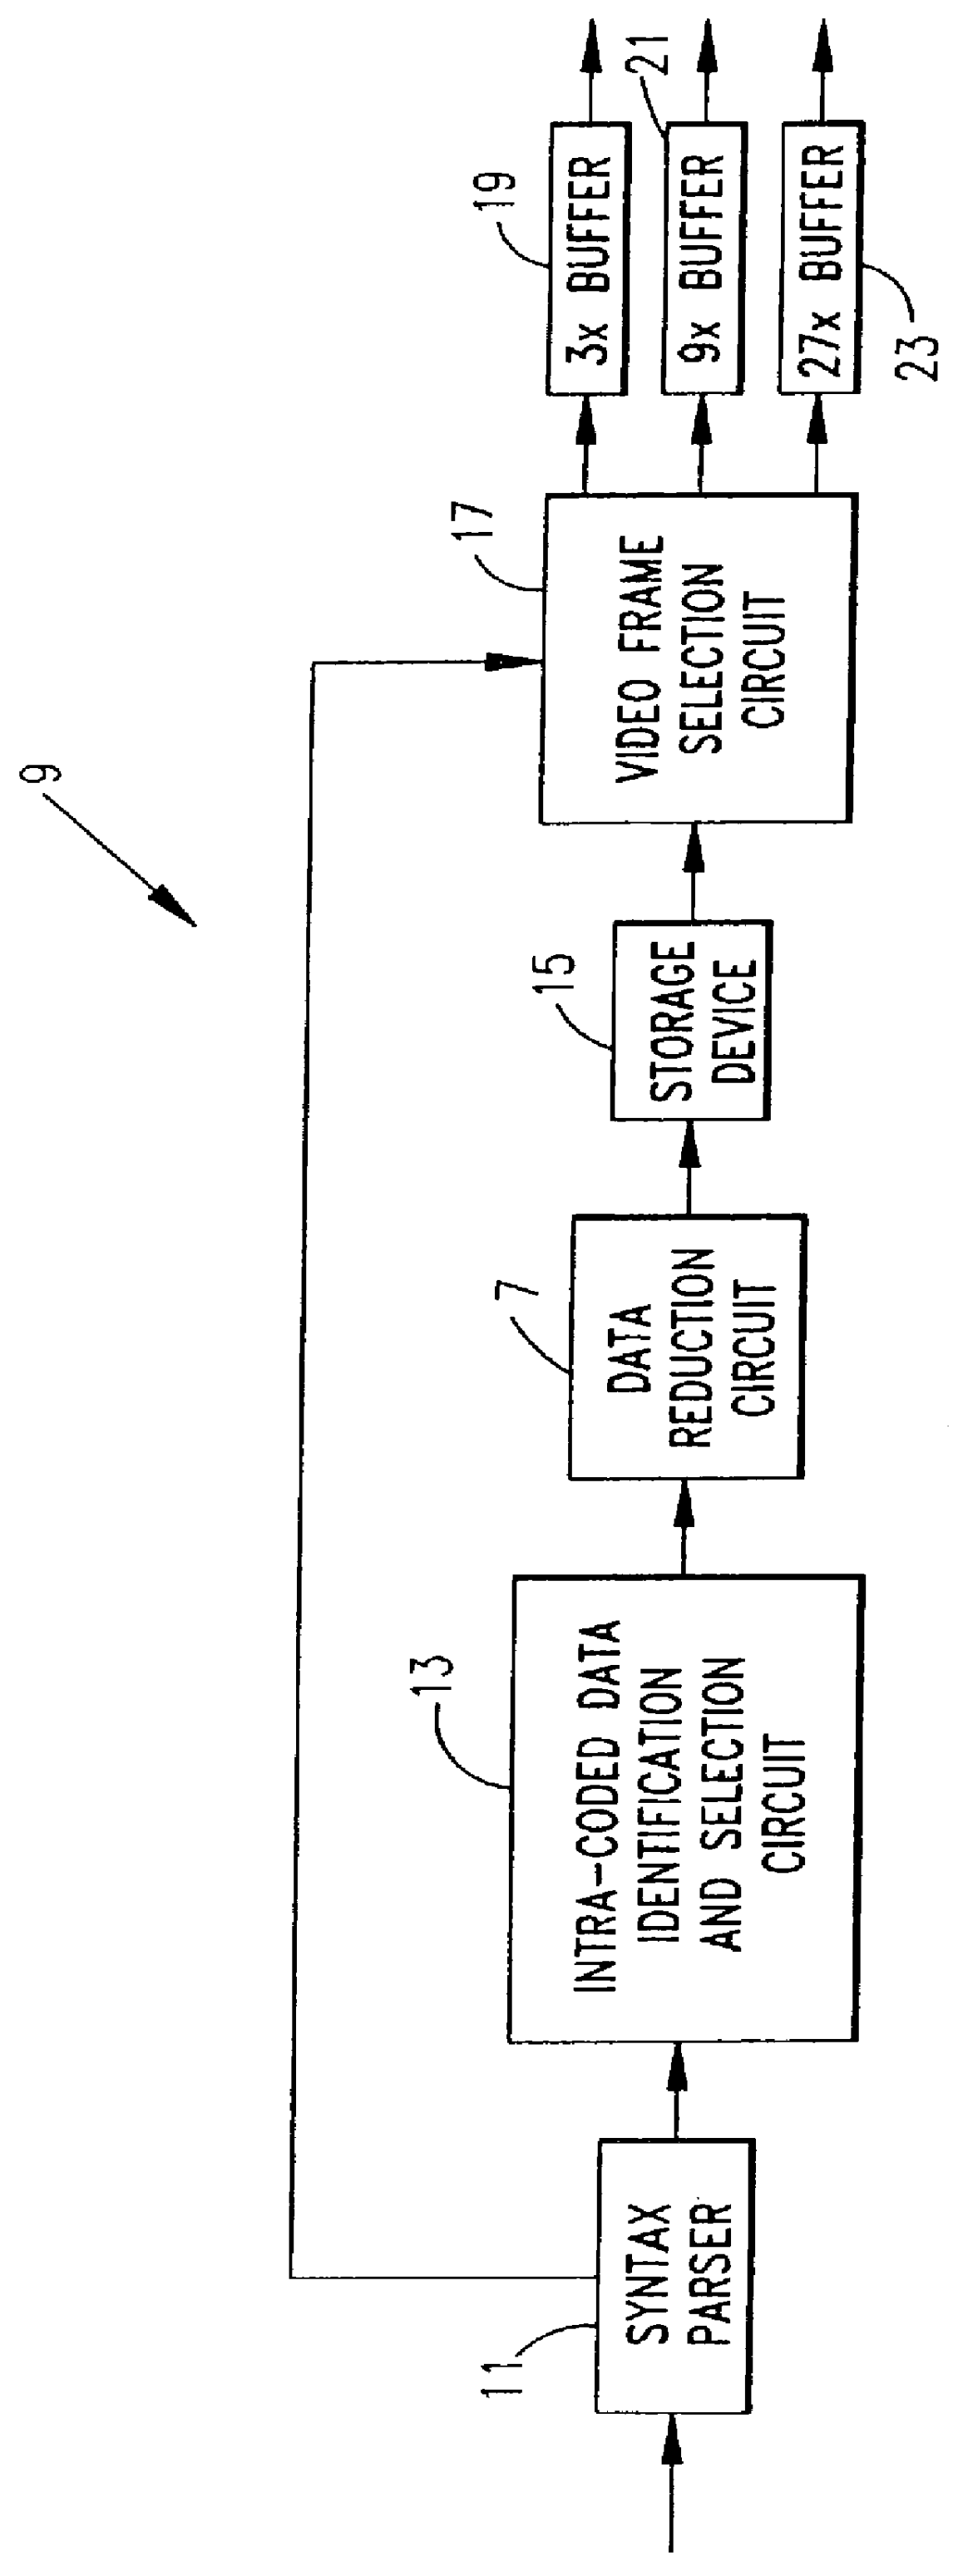 Method and apparatus for achieving video data reduction through the use of re-encoding